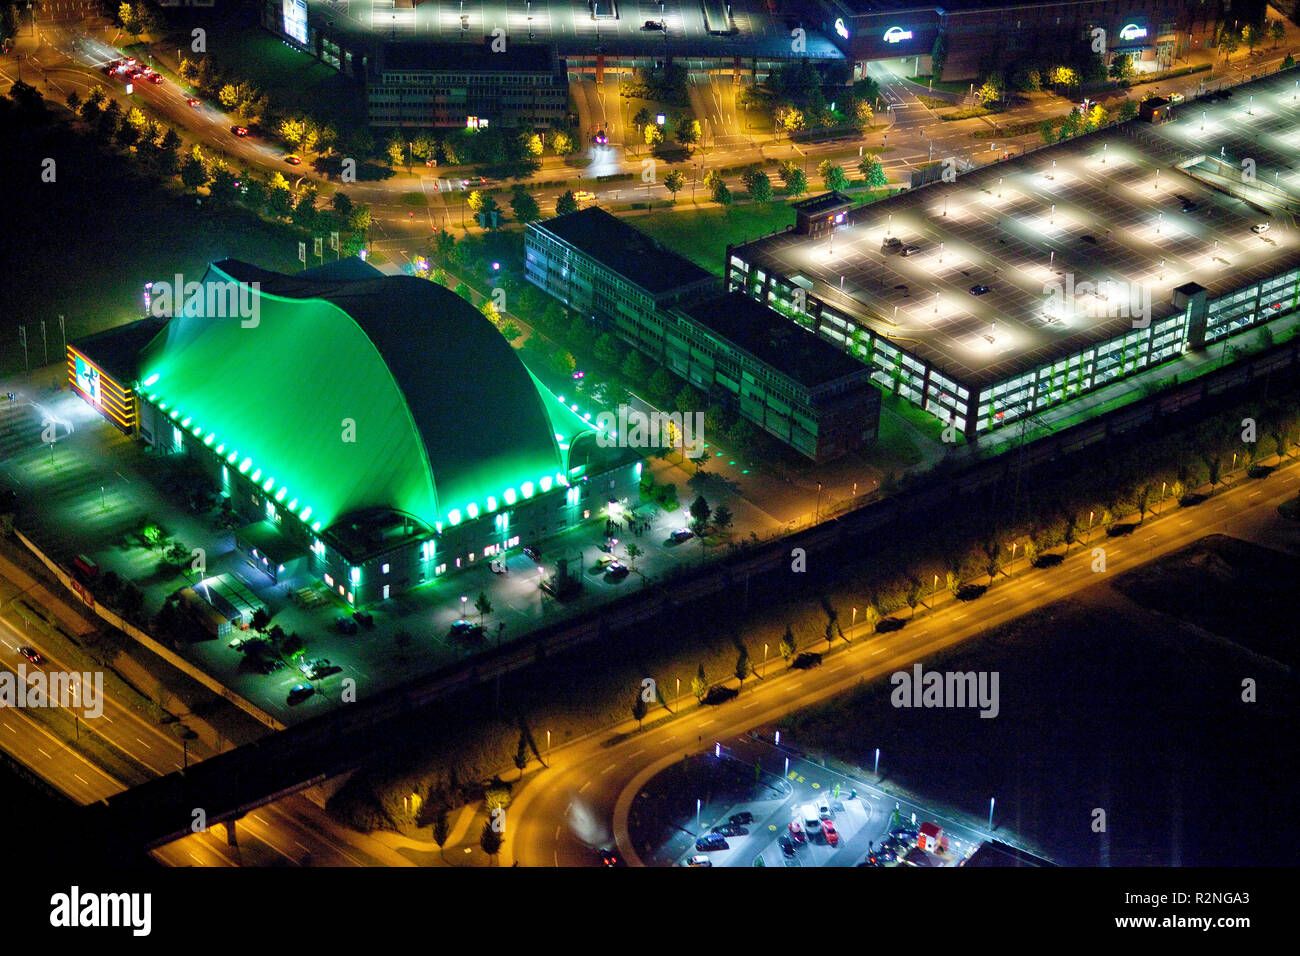 Aerial view, Night shot, Neue Mitte with gasometer, Centro, new water park, Theater at night, Oberhausen, Ruhr area, North Rhine-Westphalia, Germany, Europe, Stock Photo